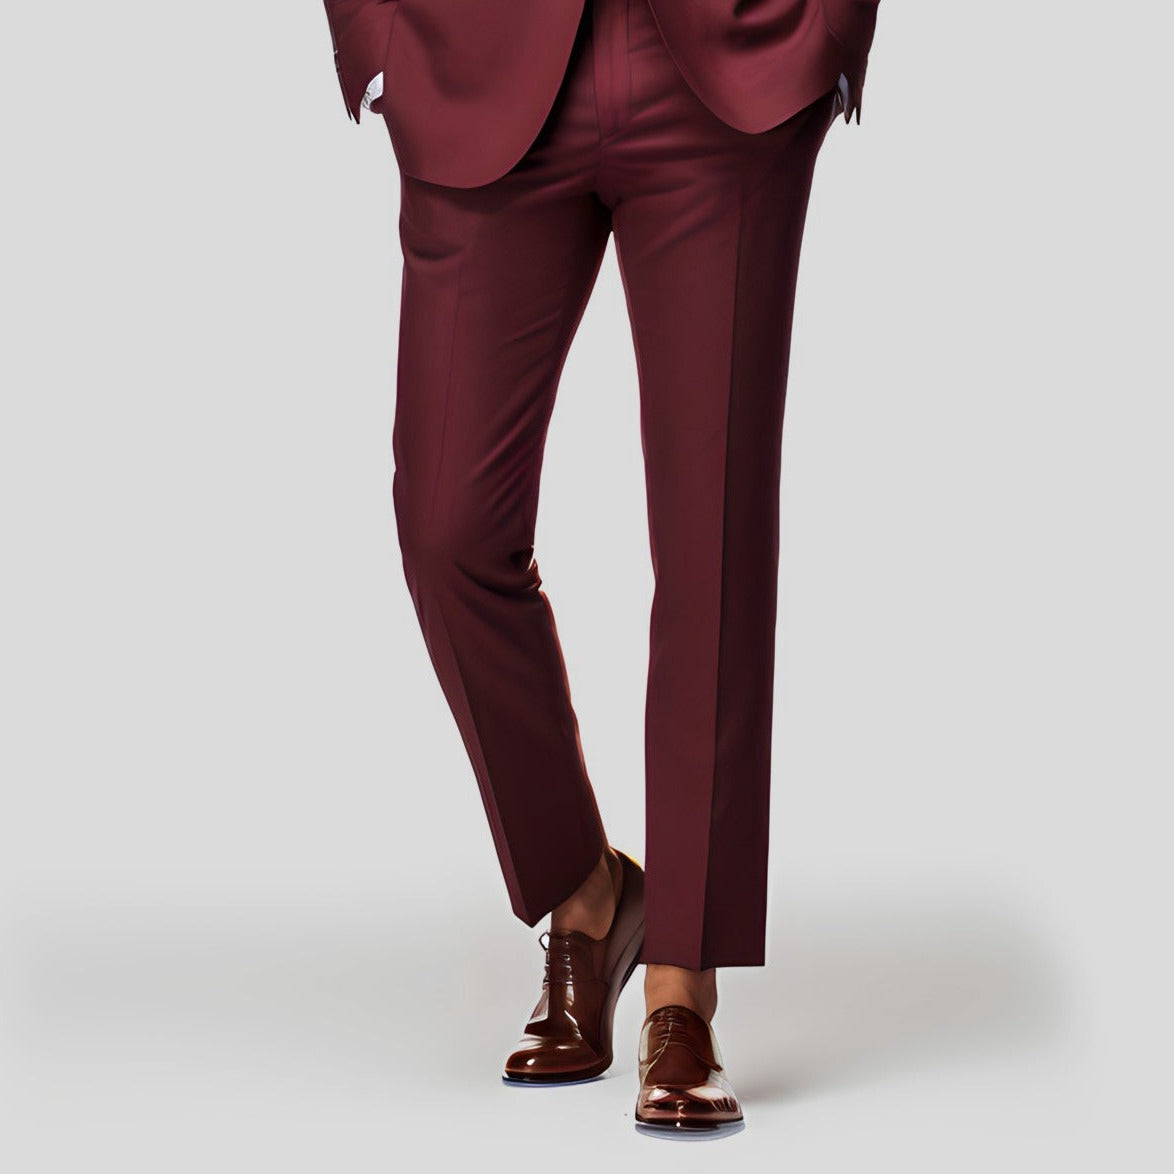 Top 53 Burgundy Pants Outfits for Men in 2022 - Next Luxury